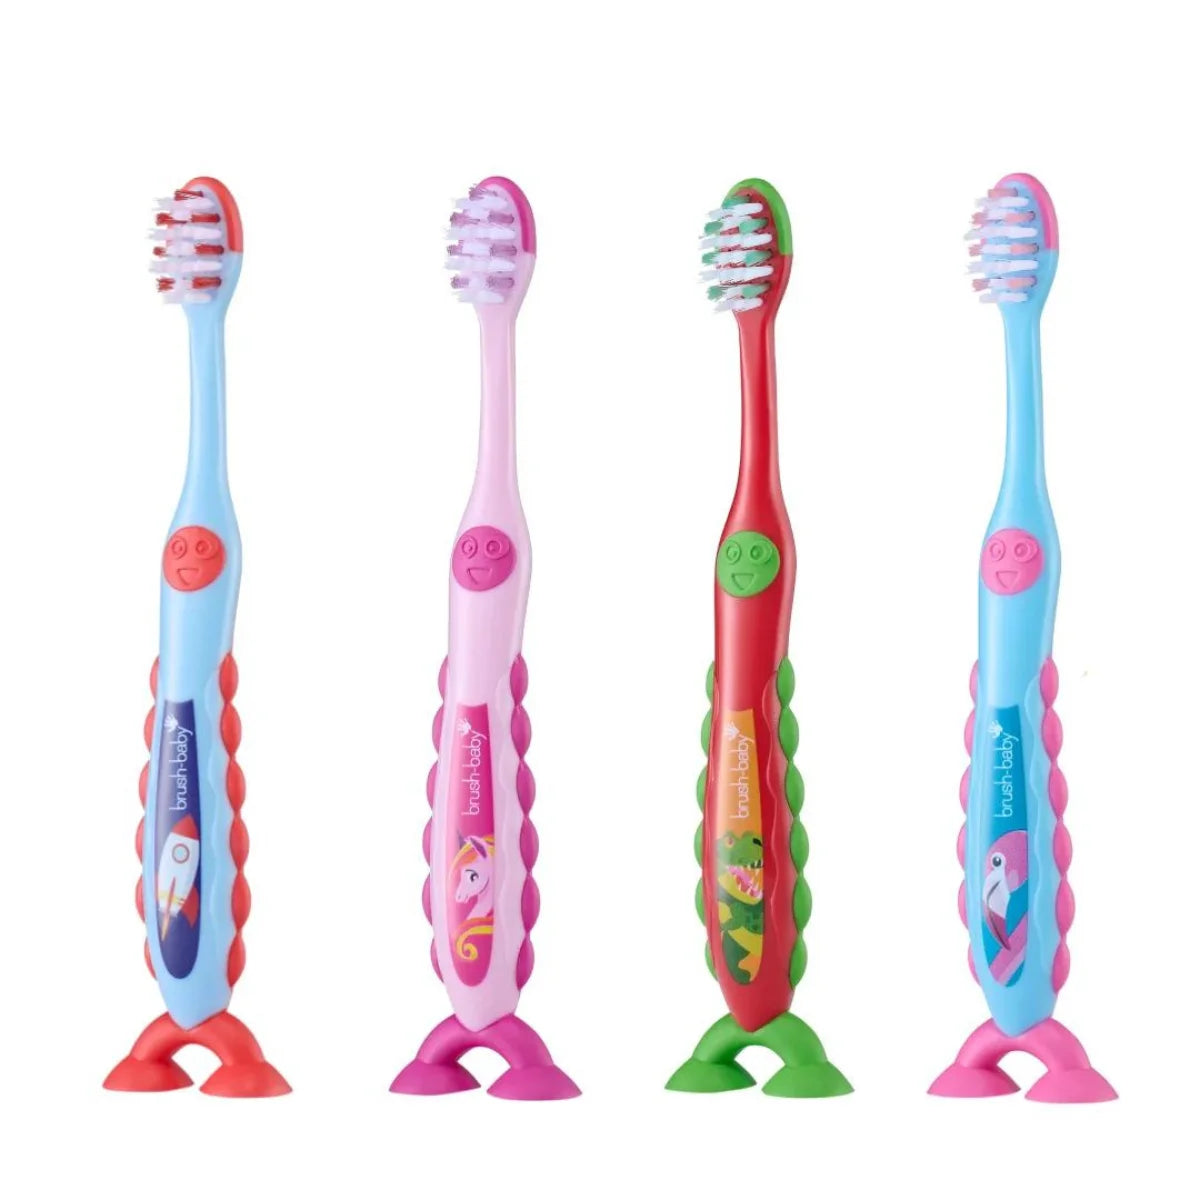 Brush-baby best toddler toothbrush flossbrush for 3-6 year old children in the following characters Jett the Rocket, Flossy the Unicon, Dex the Dinosaur and Fabio the Flamingo